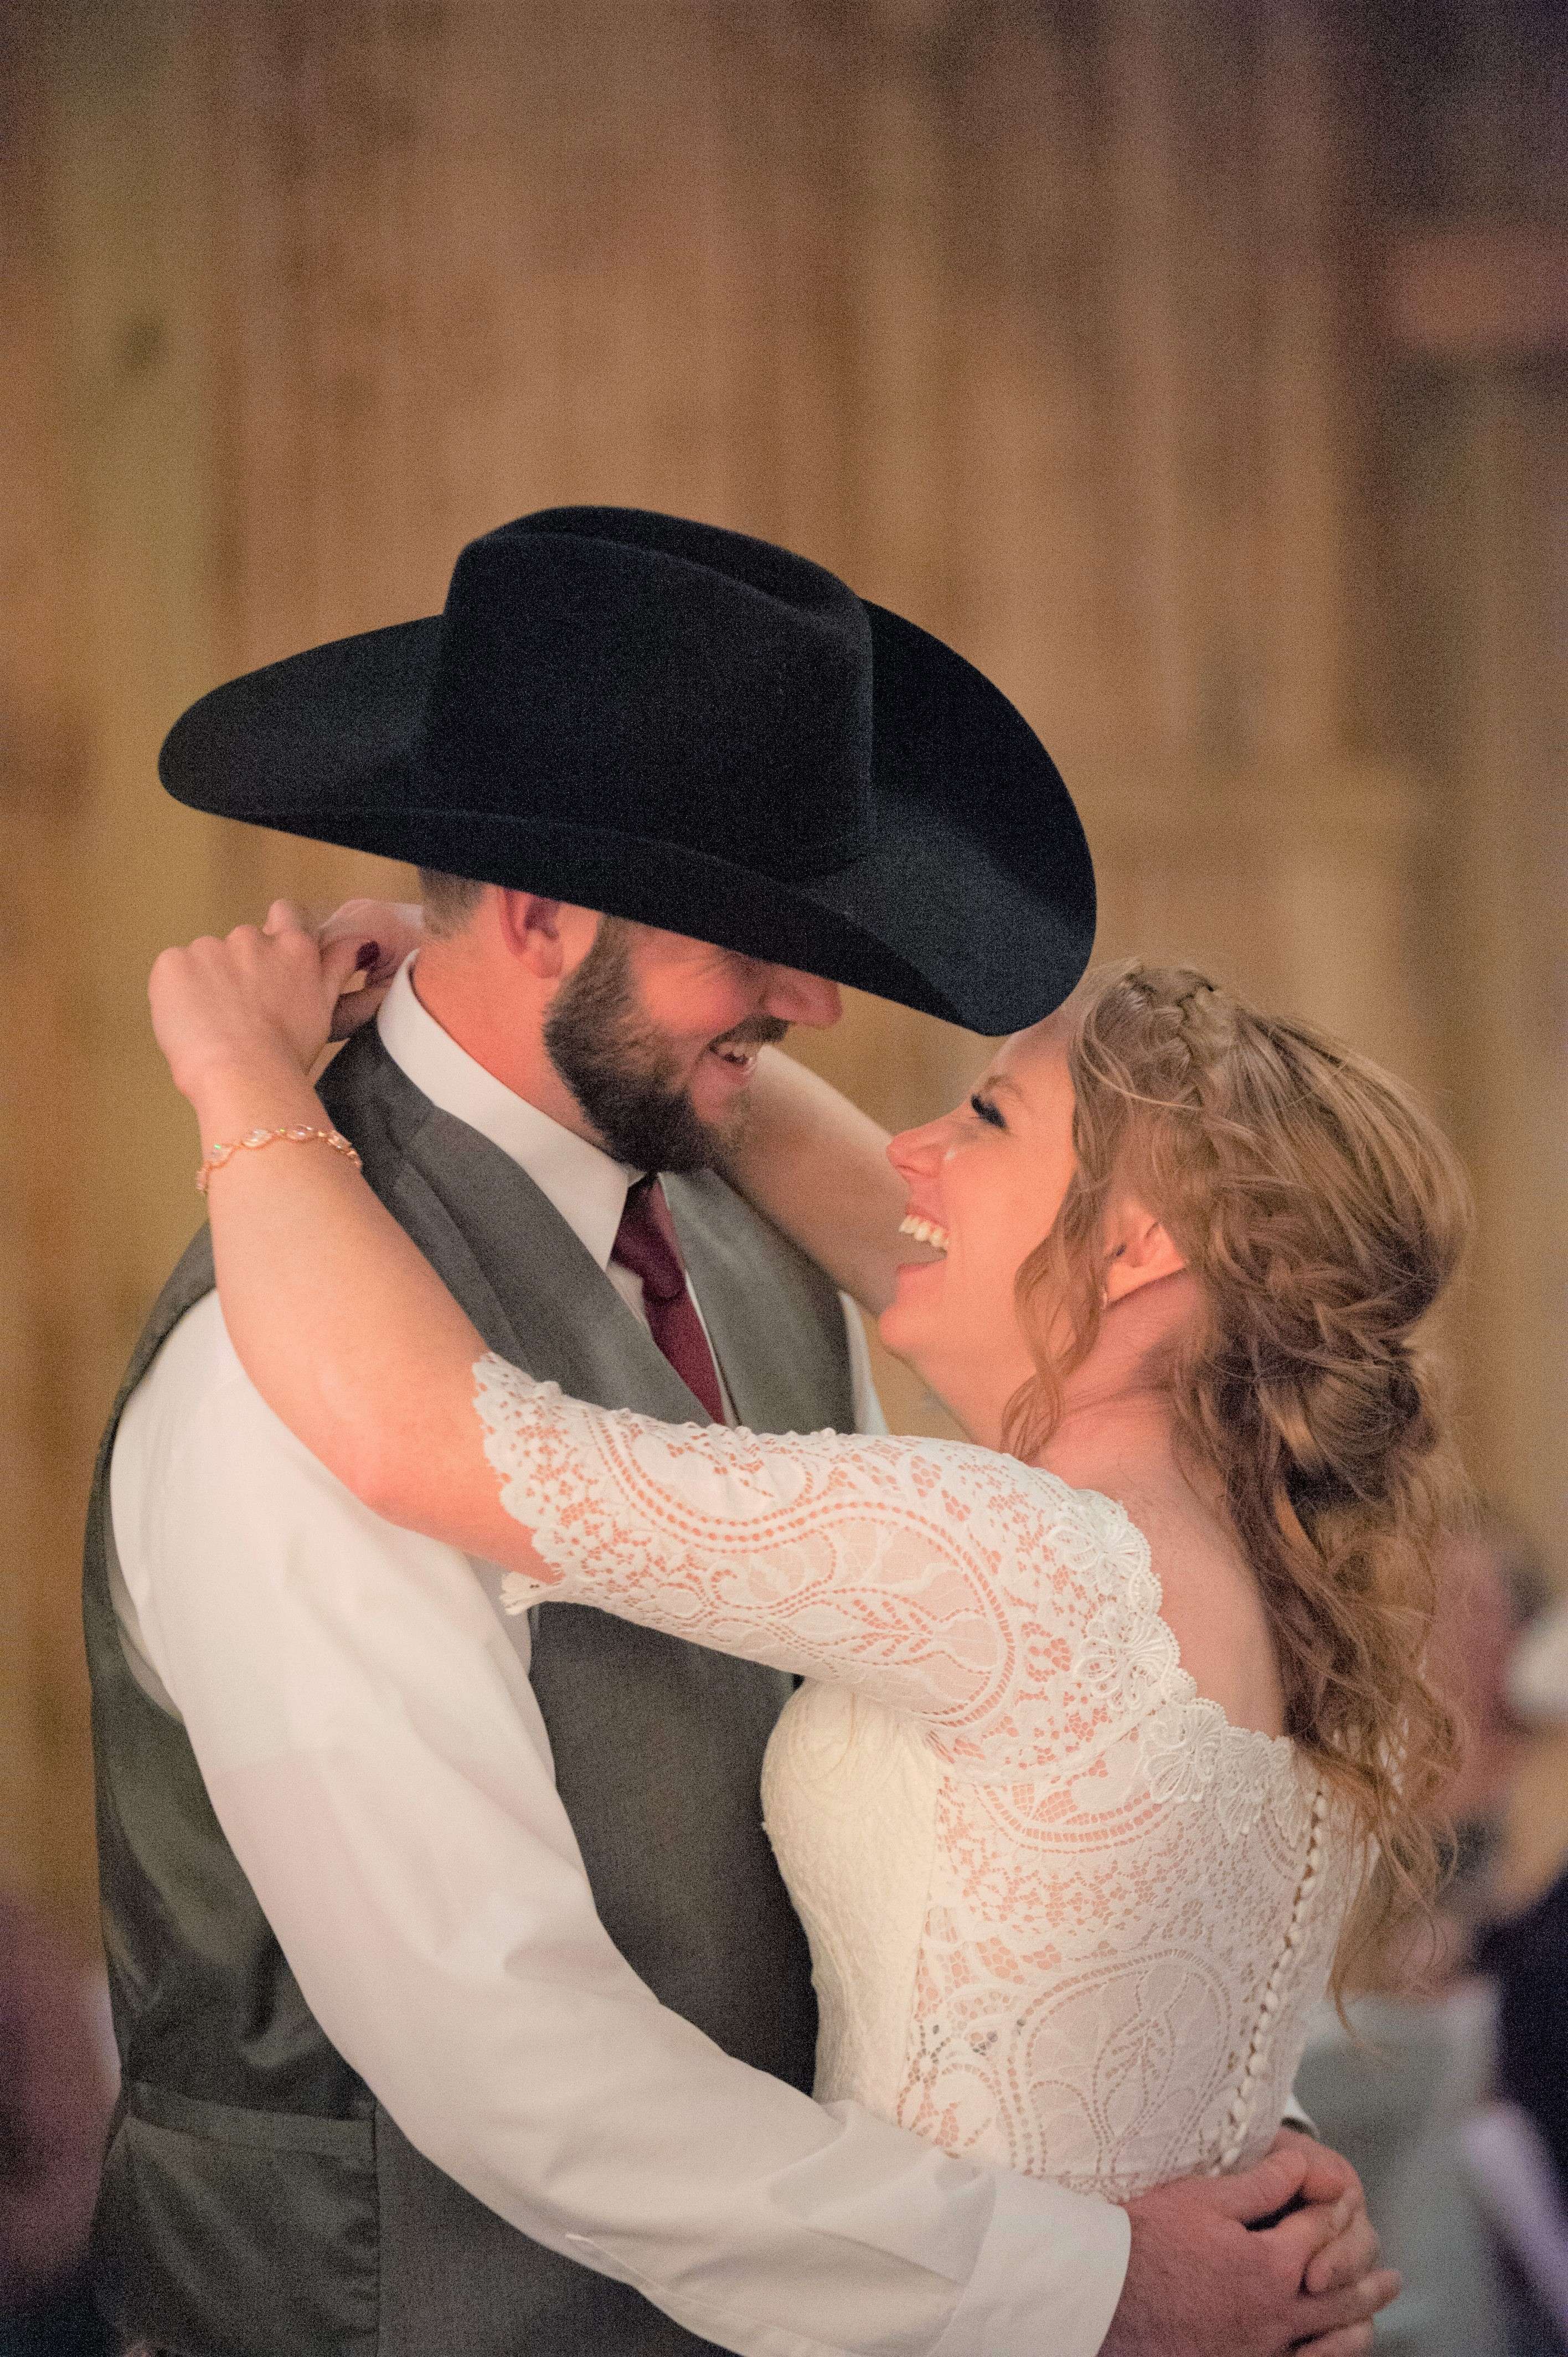 First dance with bride and groom at reception near Springfield, Missouri.